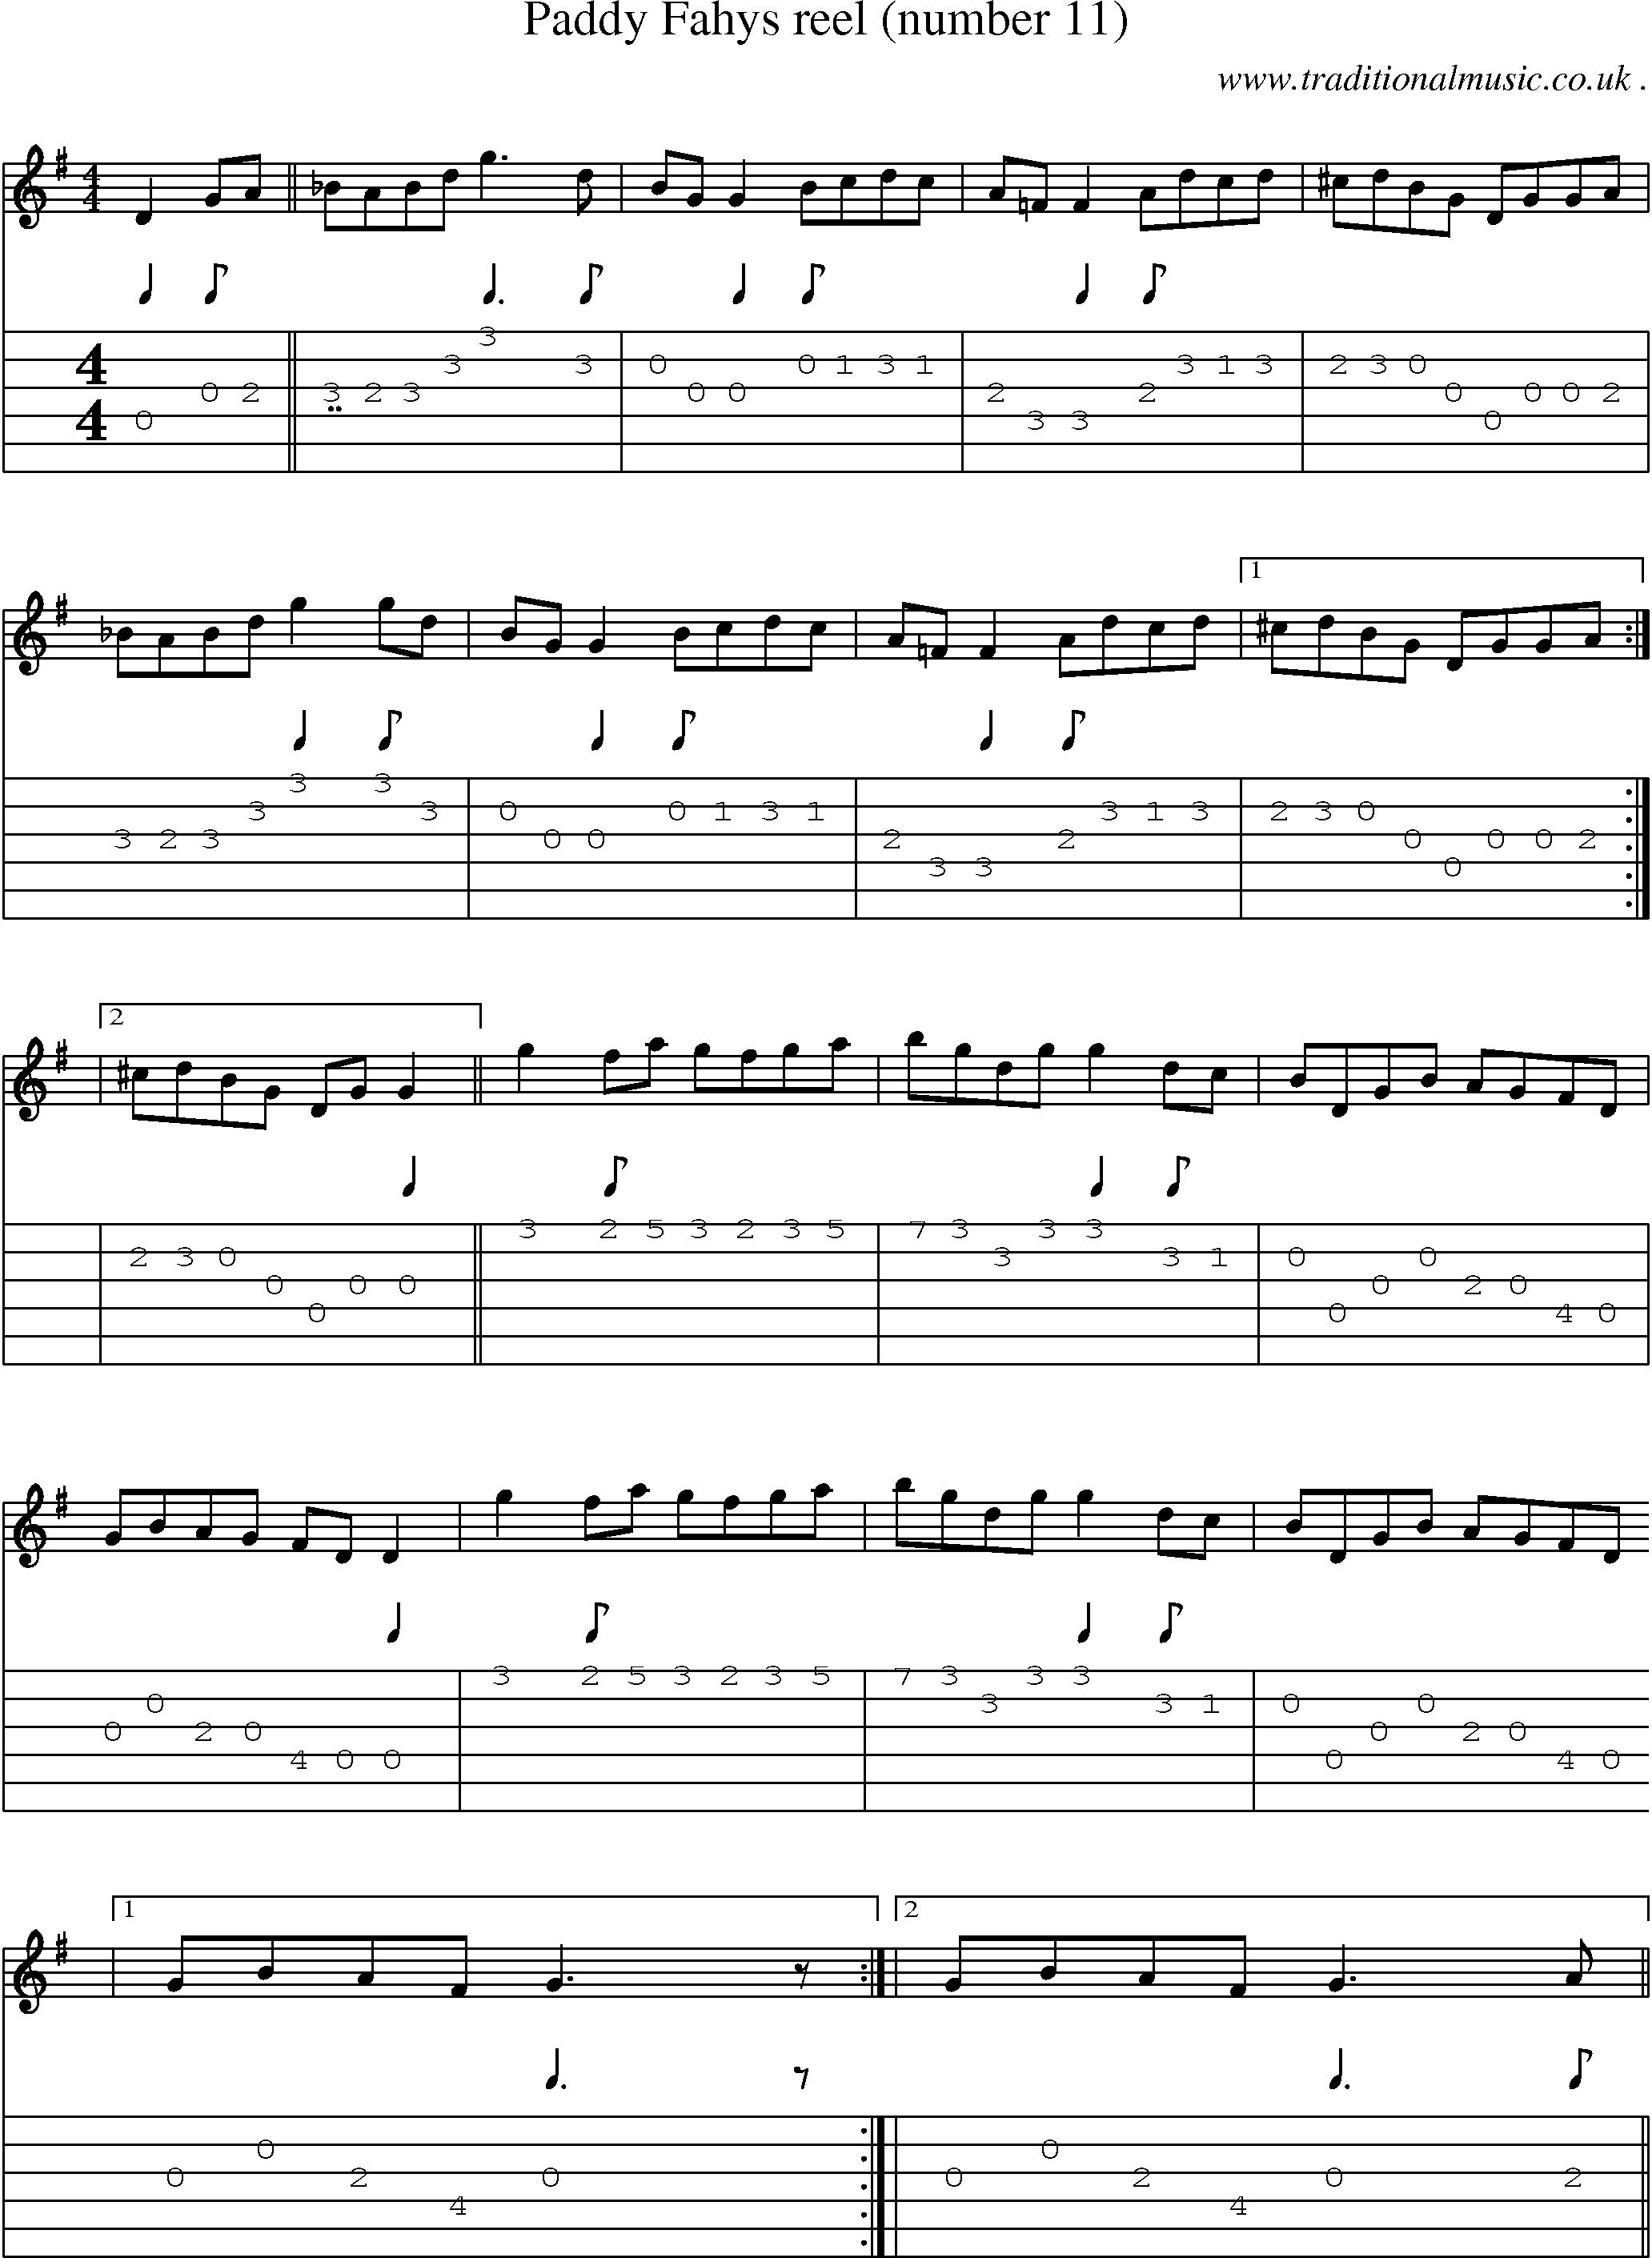 Sheet-Music and Guitar Tabs for Paddy Fahys Reel (number 11)